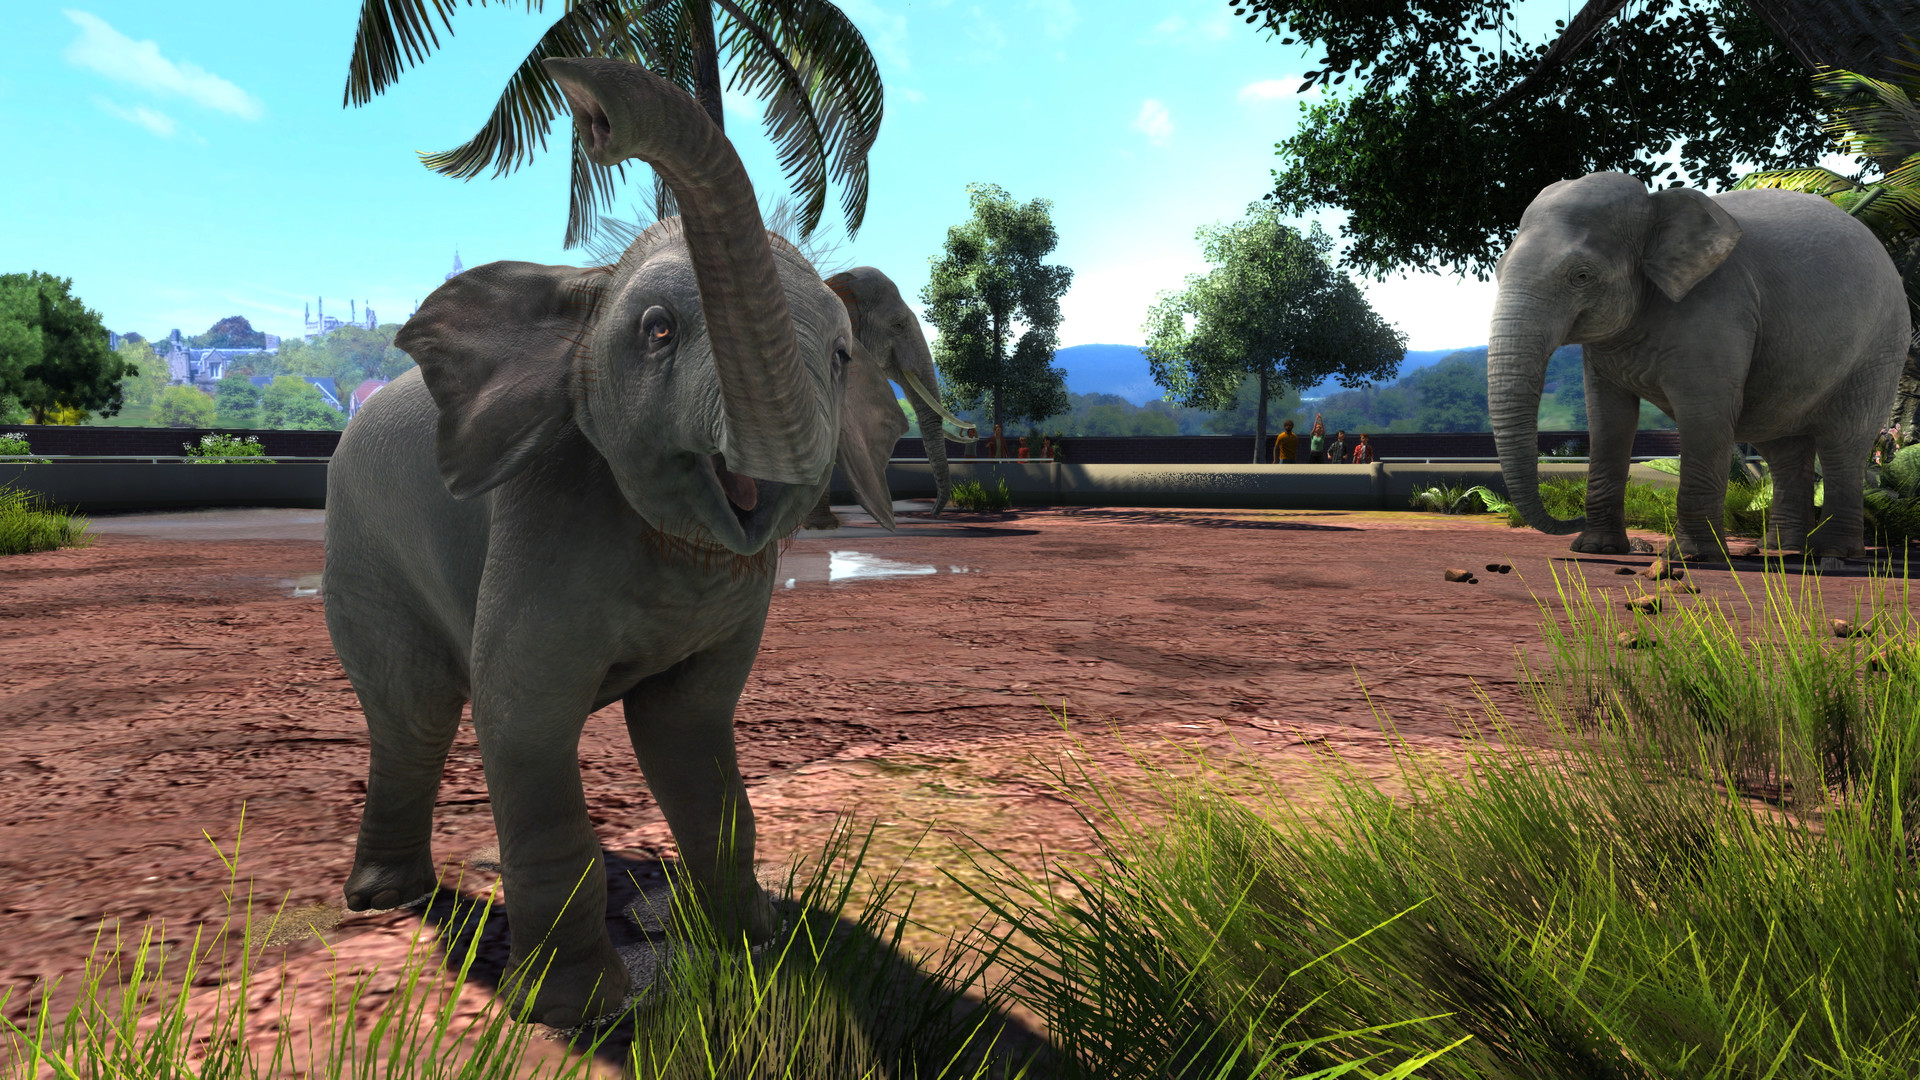 zoo tycoon ultimate collection